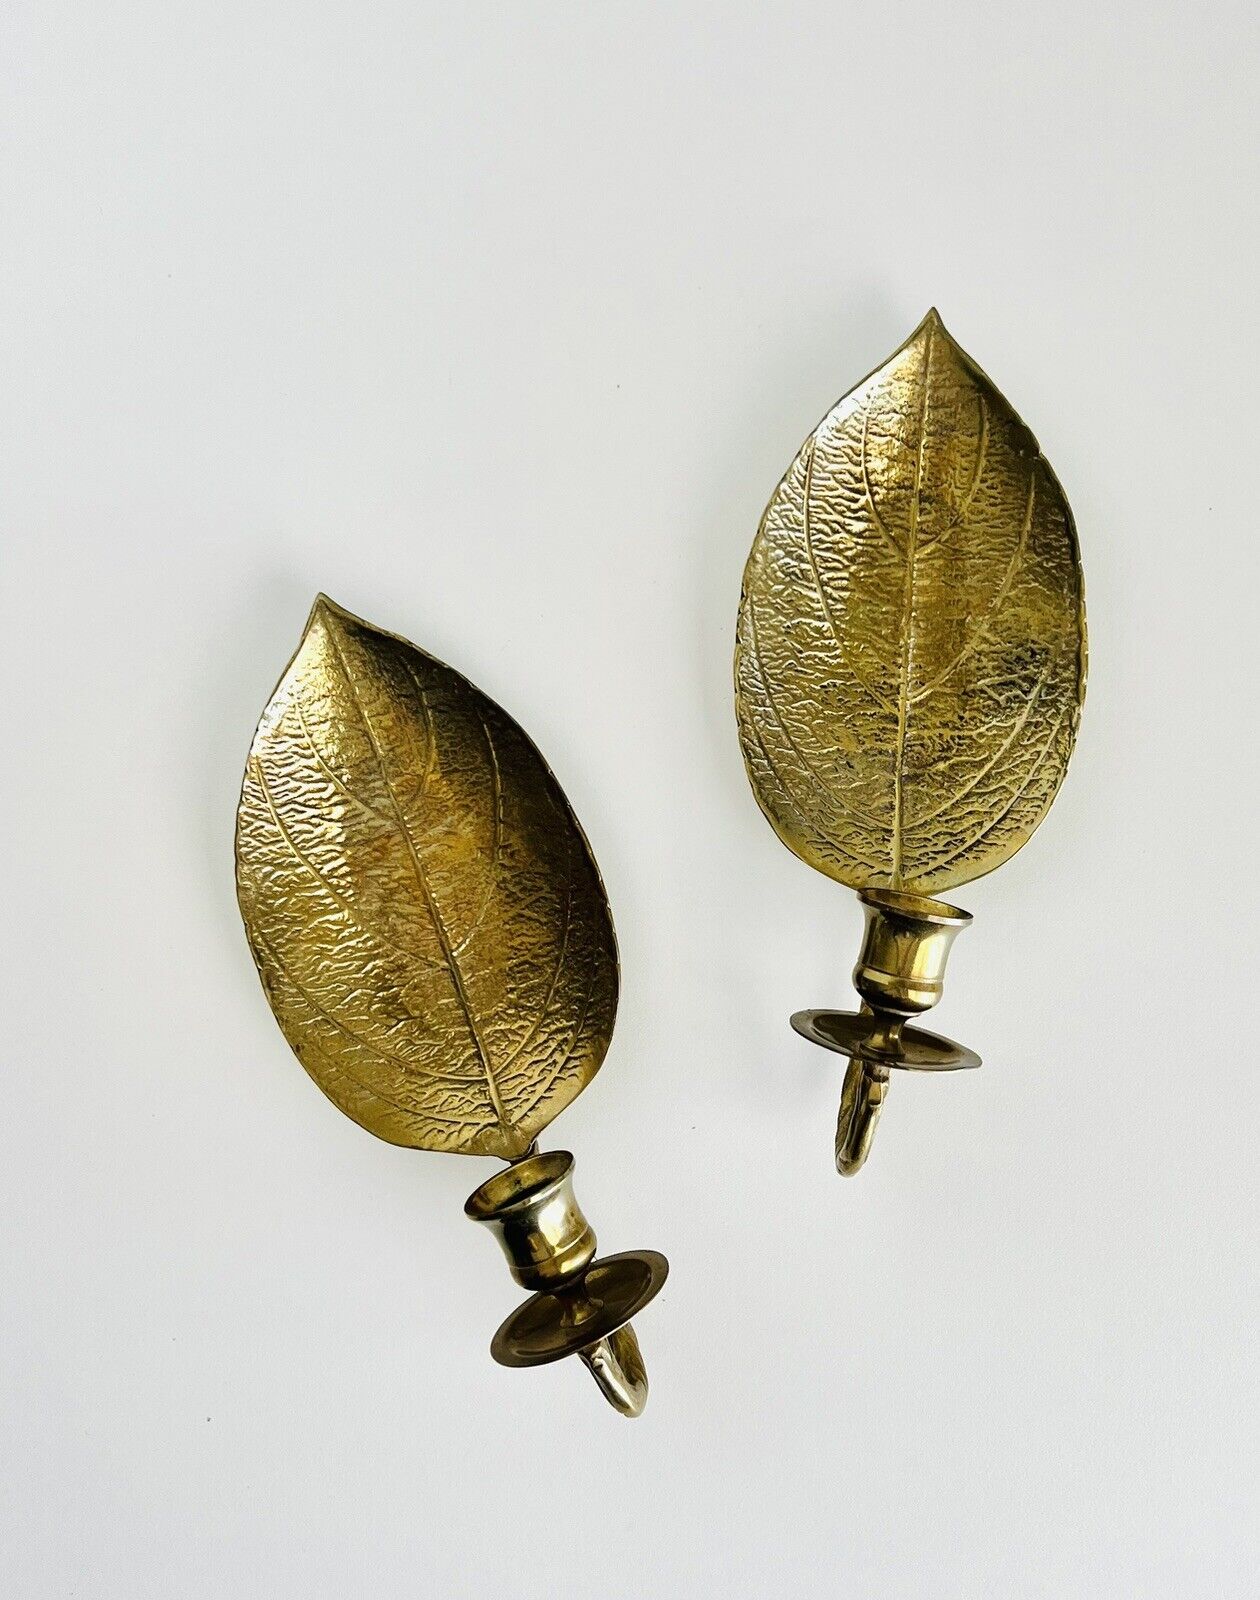 Vintage (2) FRITZ BRASS Leaf Shaped Candle Holders Wall Hanging Sconces 9x4